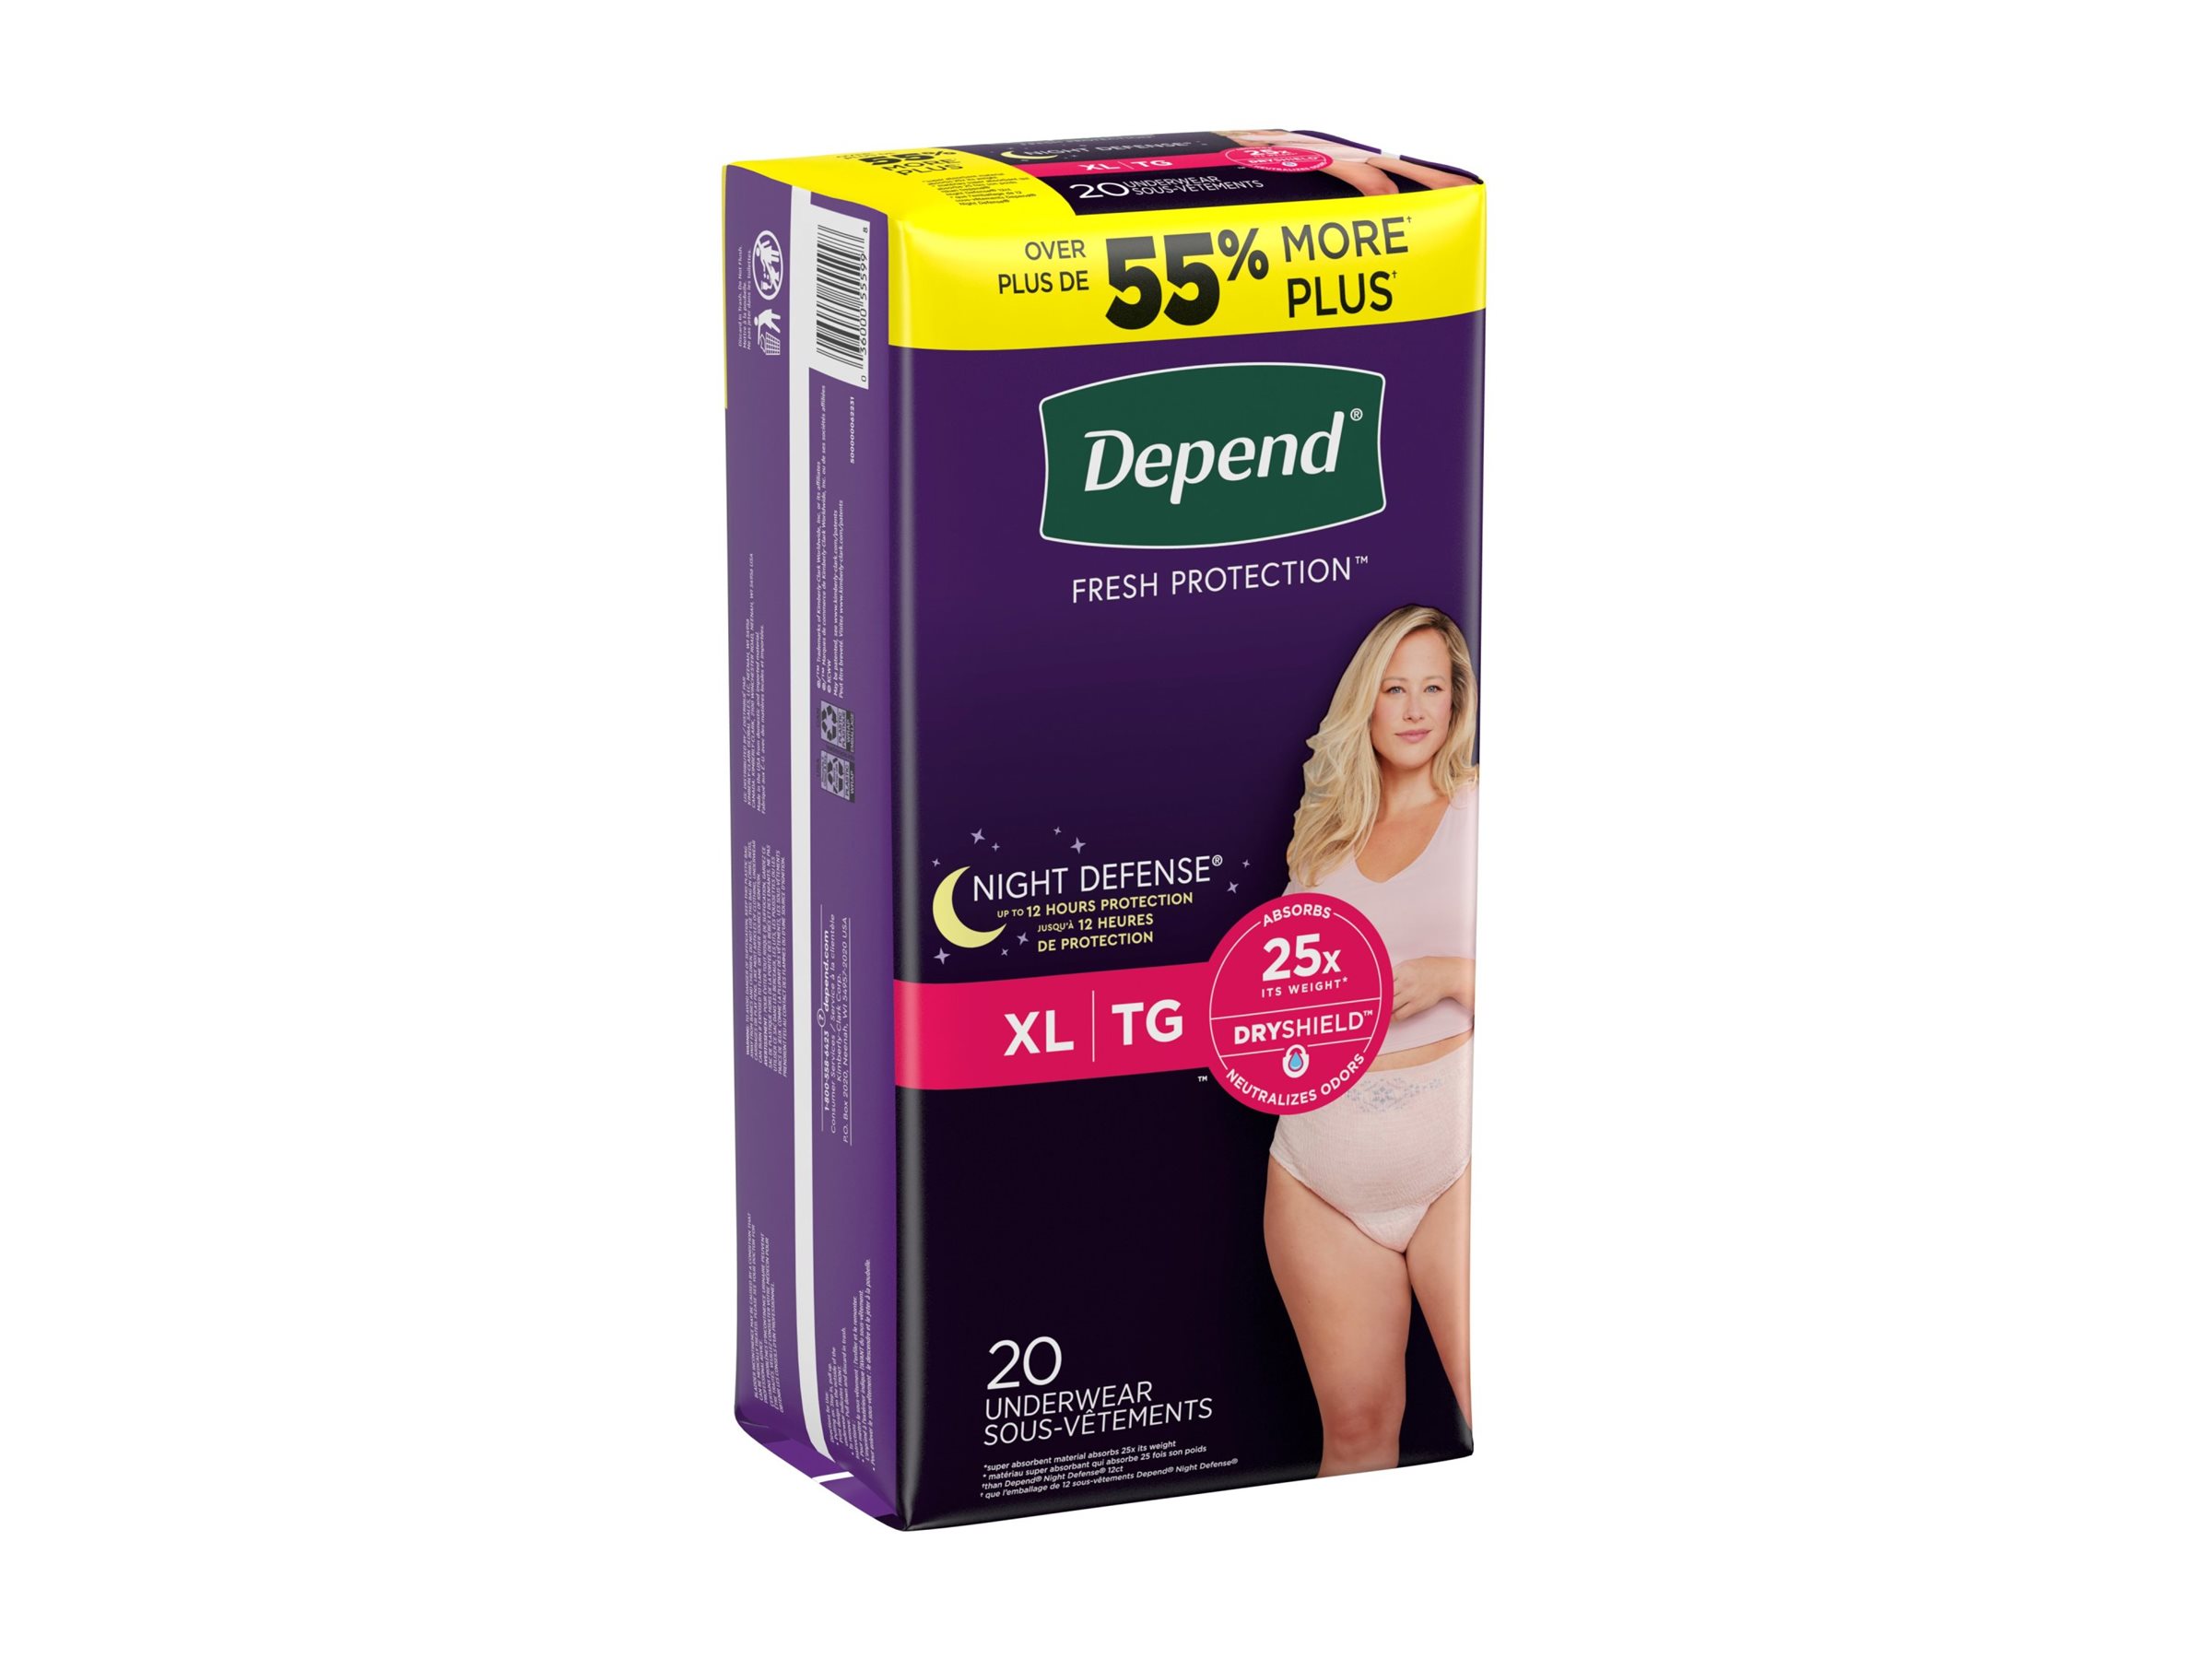 Depend Fresh Protection Night Defense Incontinence Underwear for